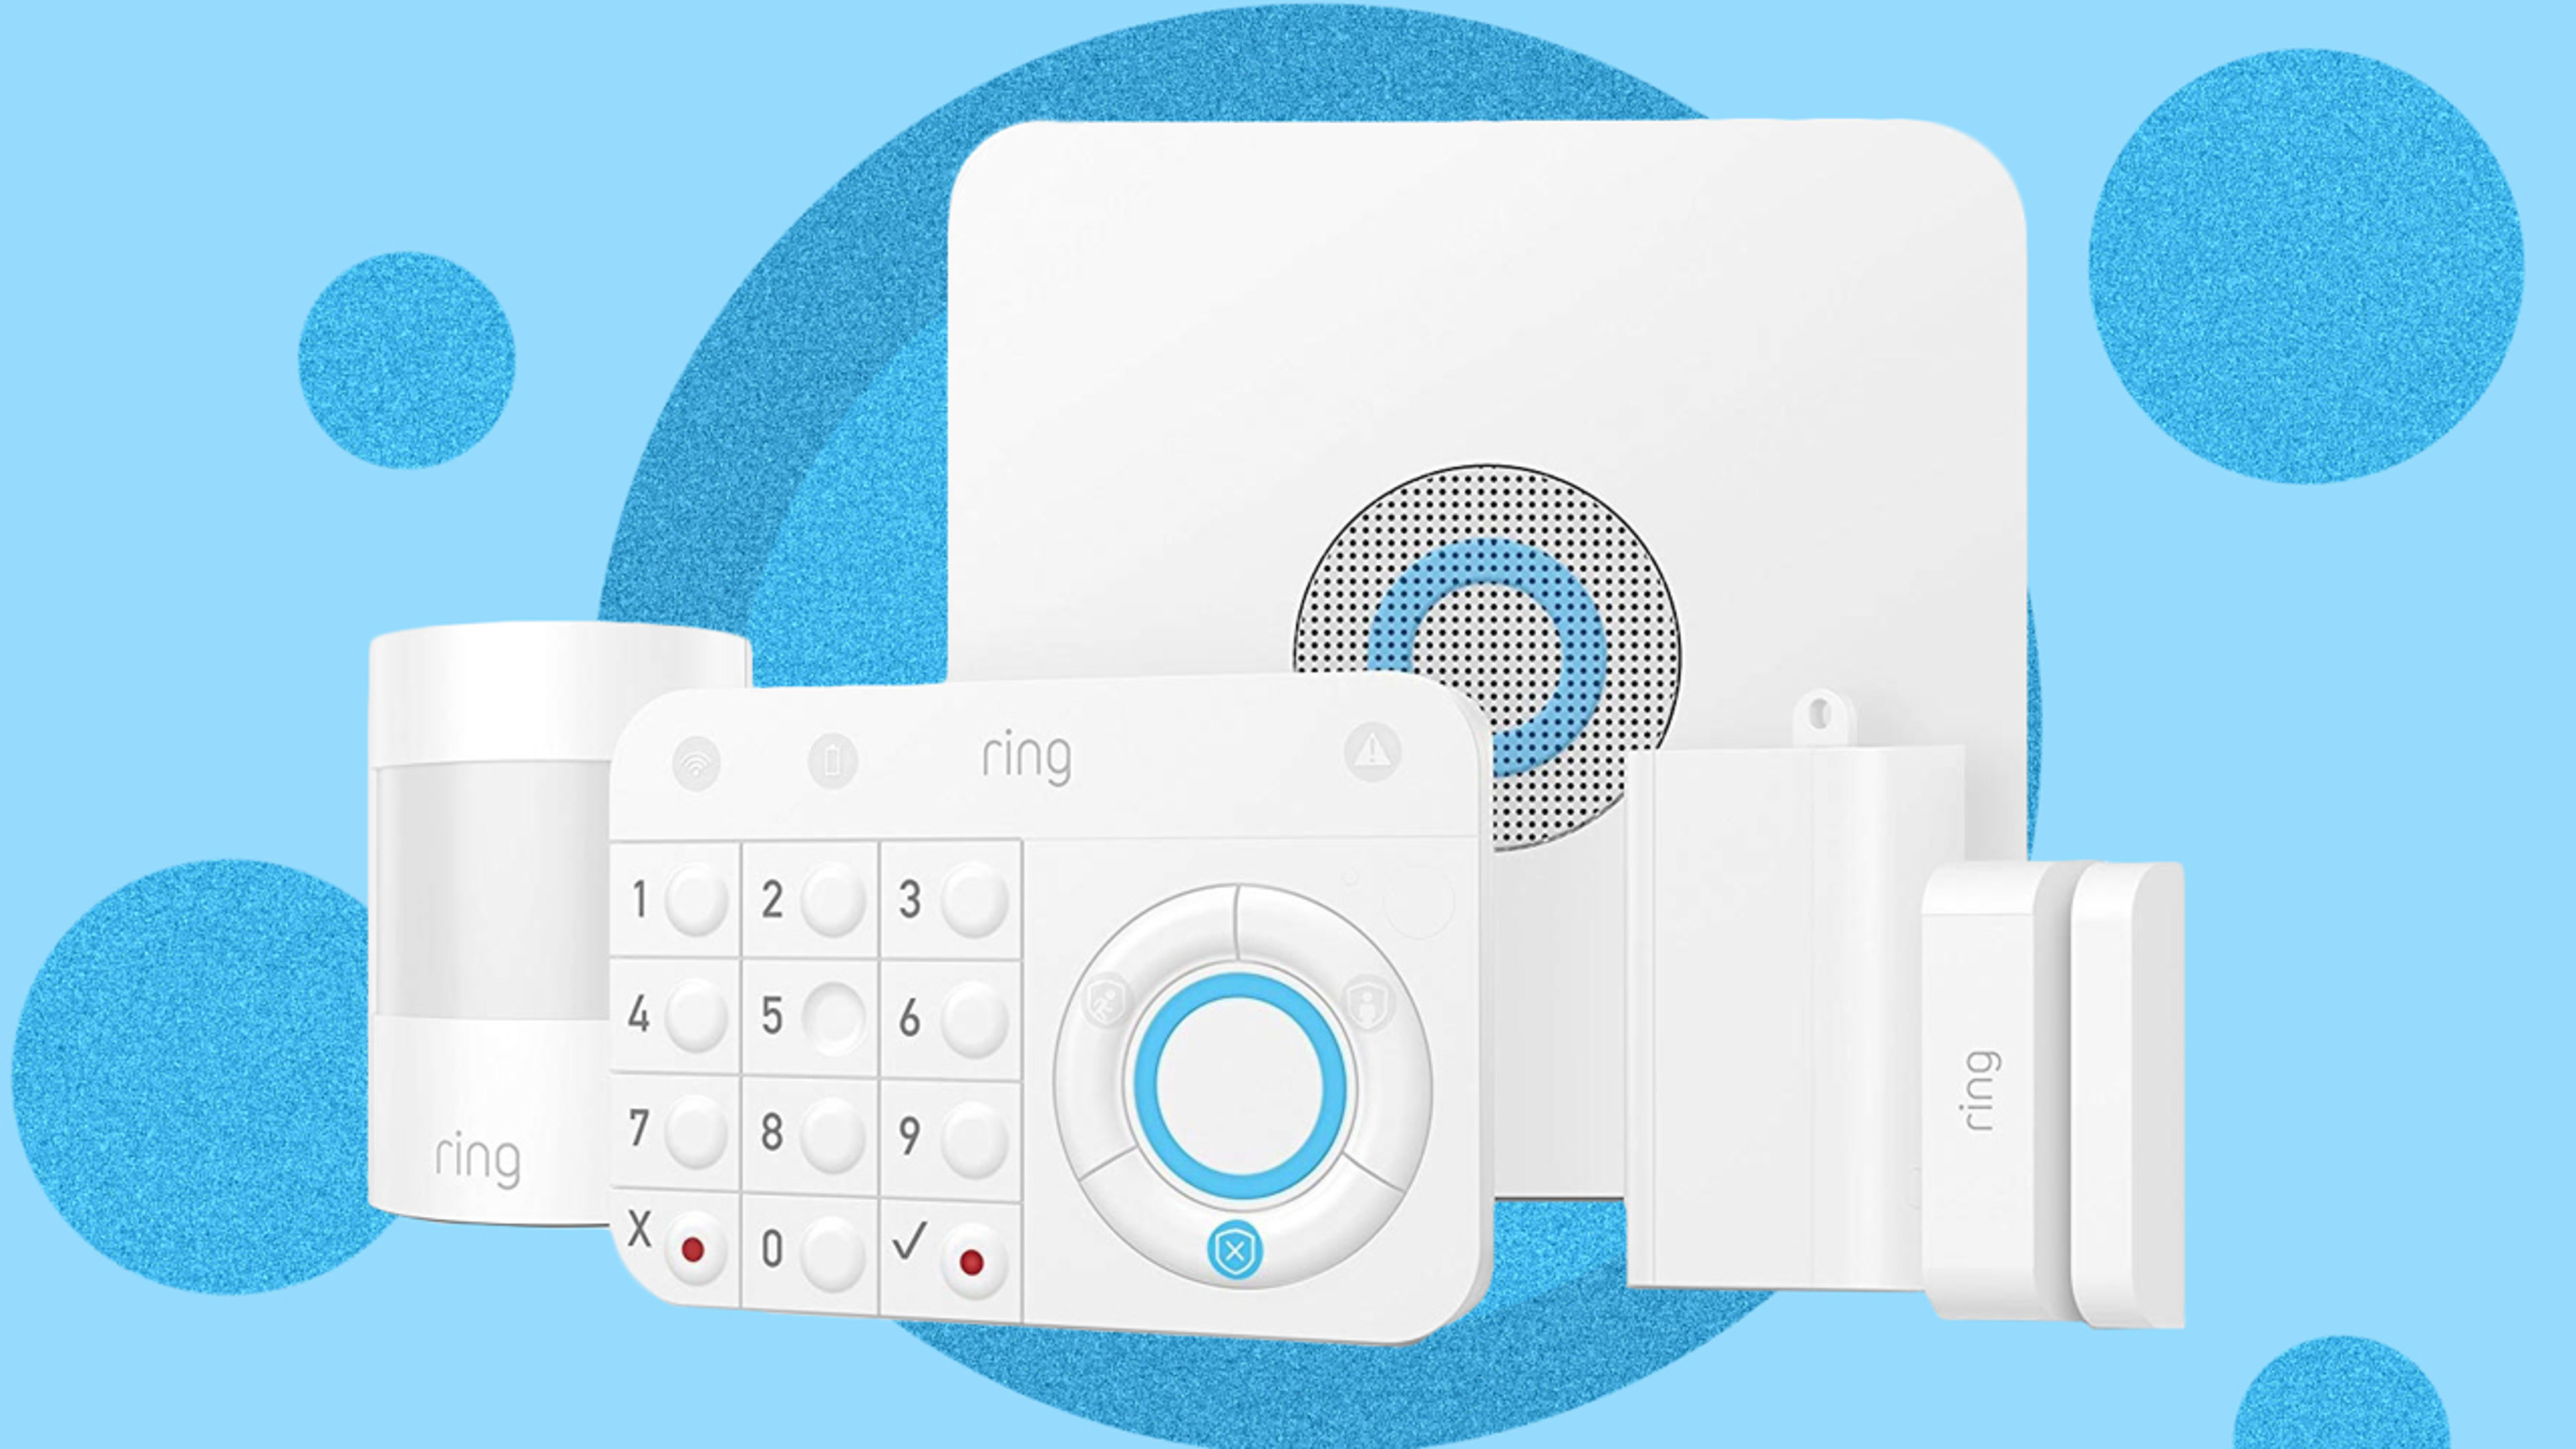 Ring’s smart home plans would sound great if Ring itself was less frightening